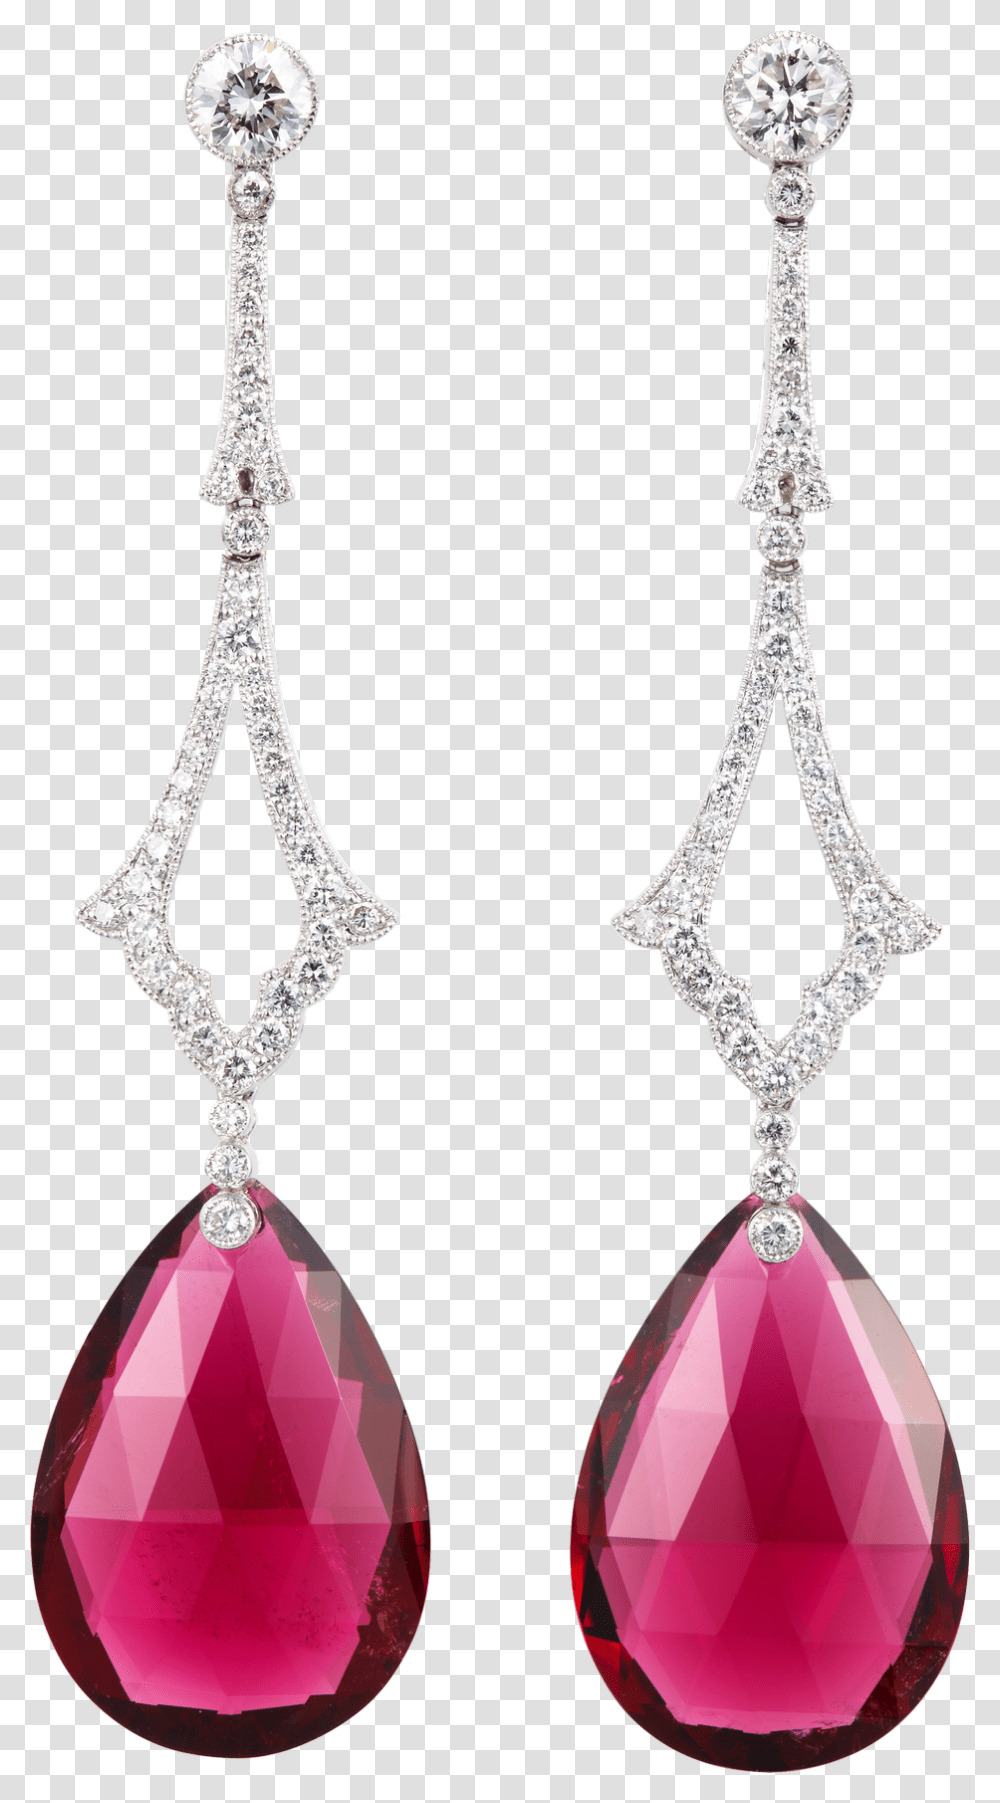 Diamond Earring Image Background Earring, Jewelry, Accessories, Accessory, Crystal Transparent Png